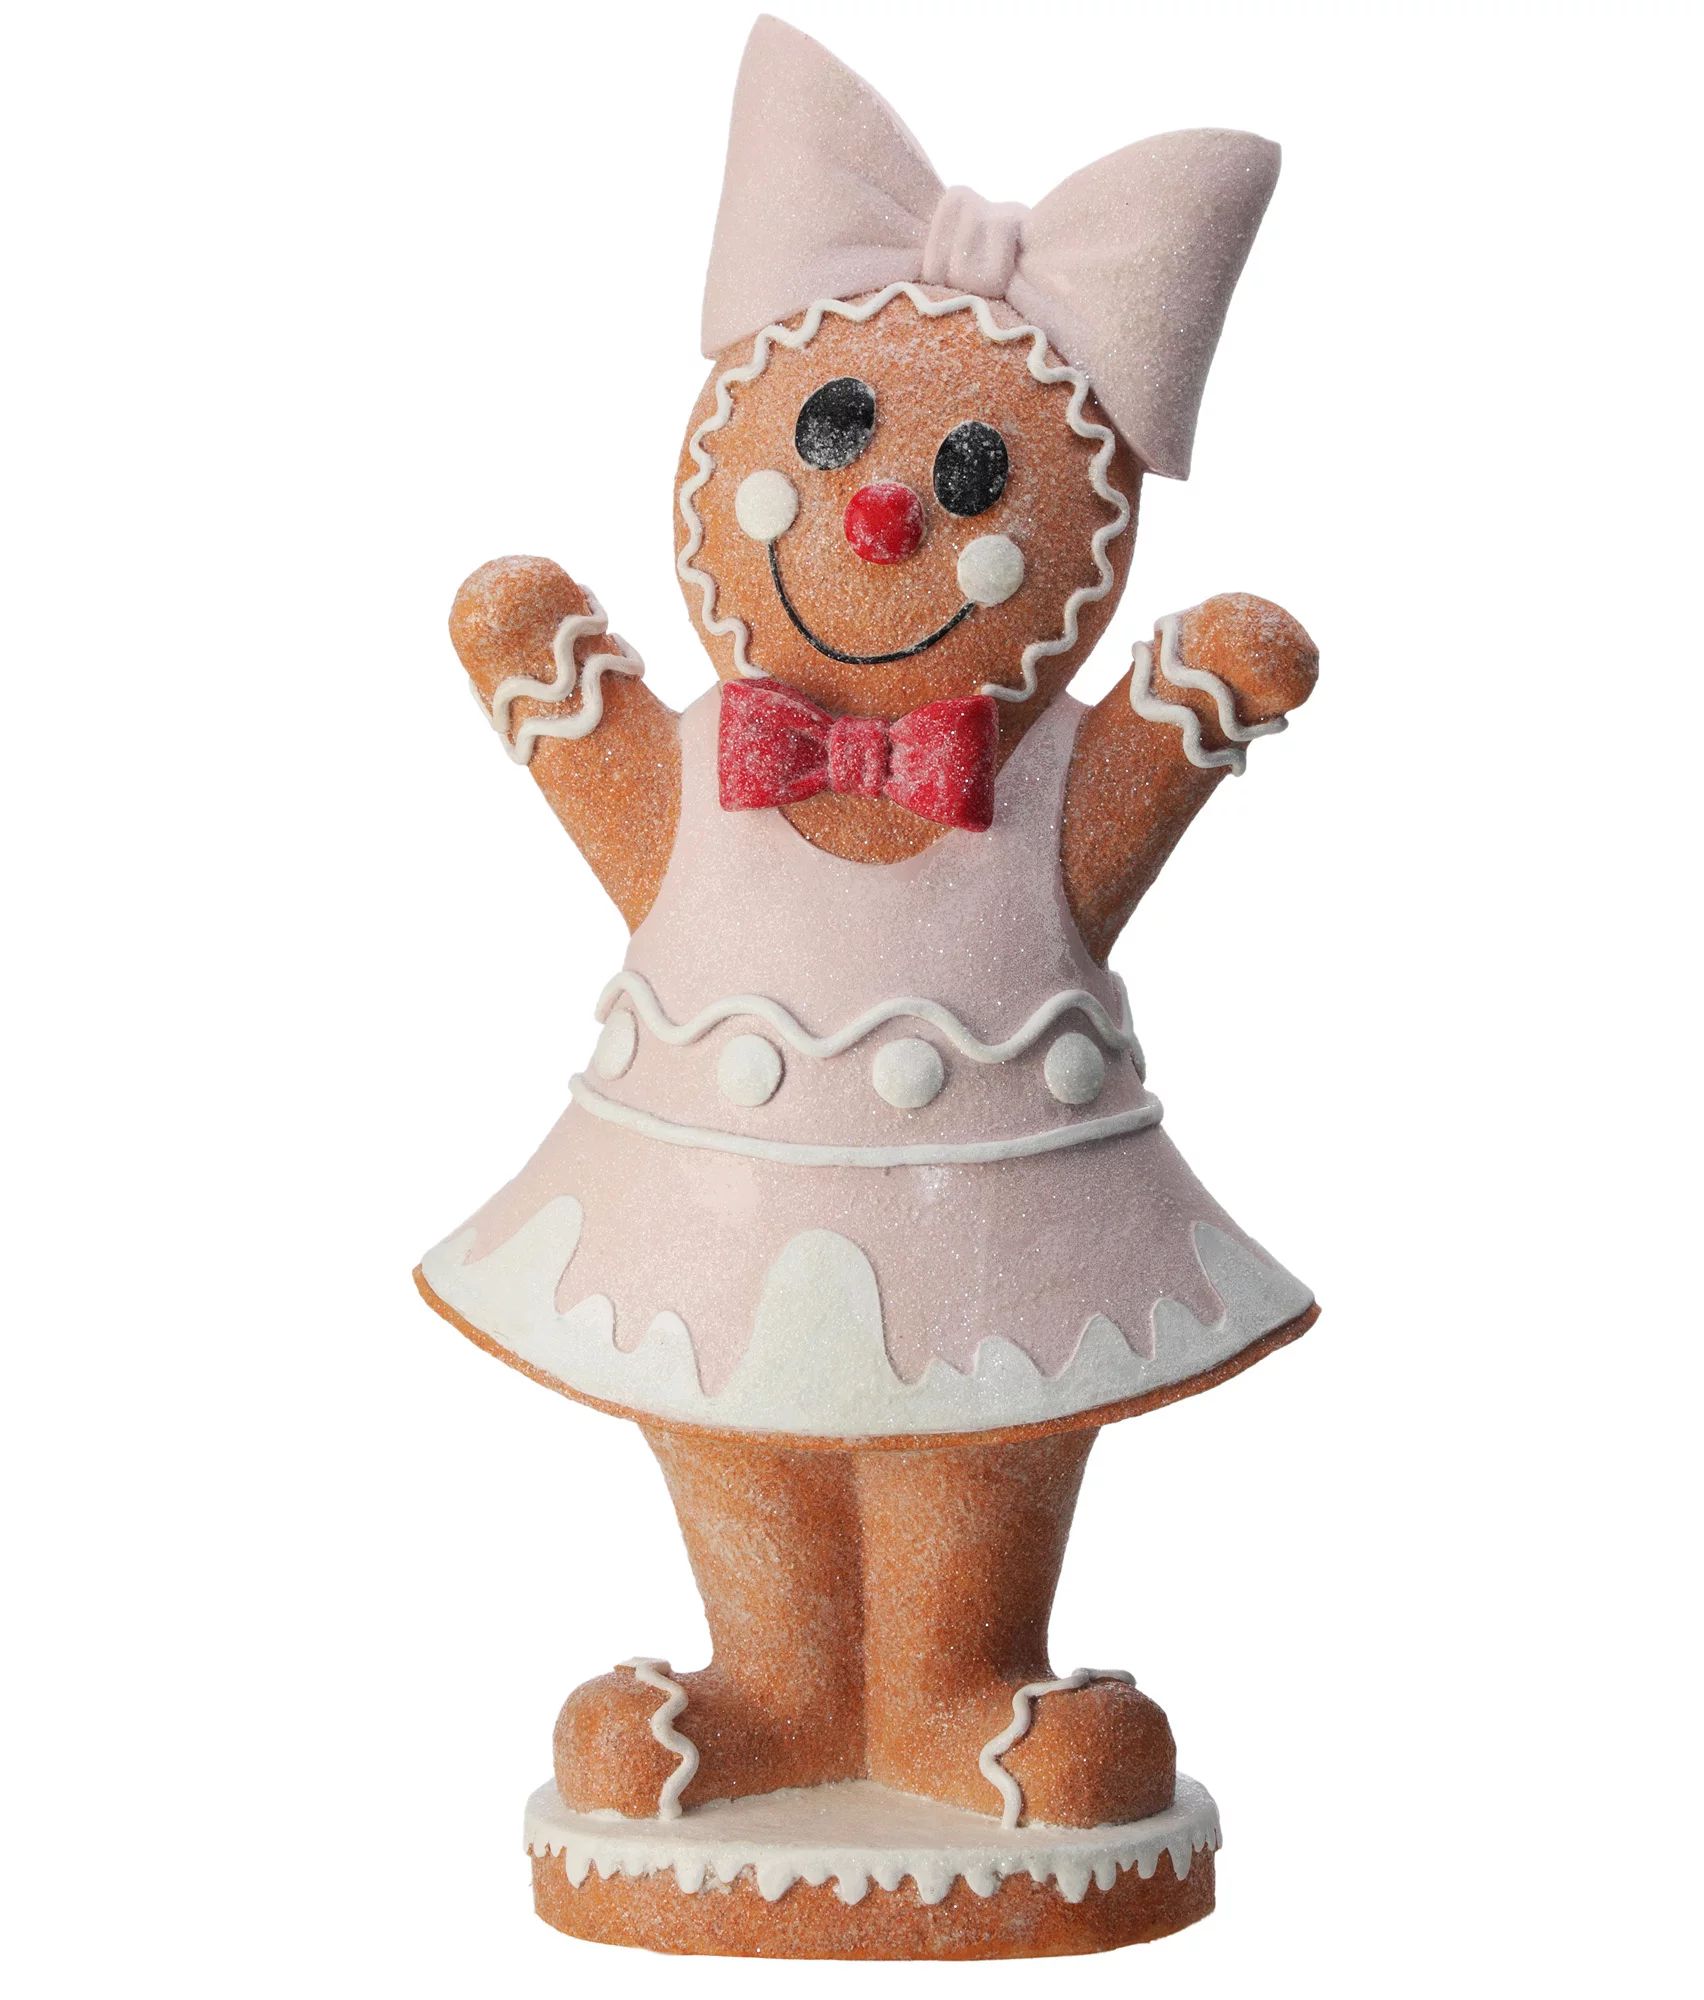 24" White and Brown Resin Gingerbread Girl with Bow Christmas Accent | Walmart (US)